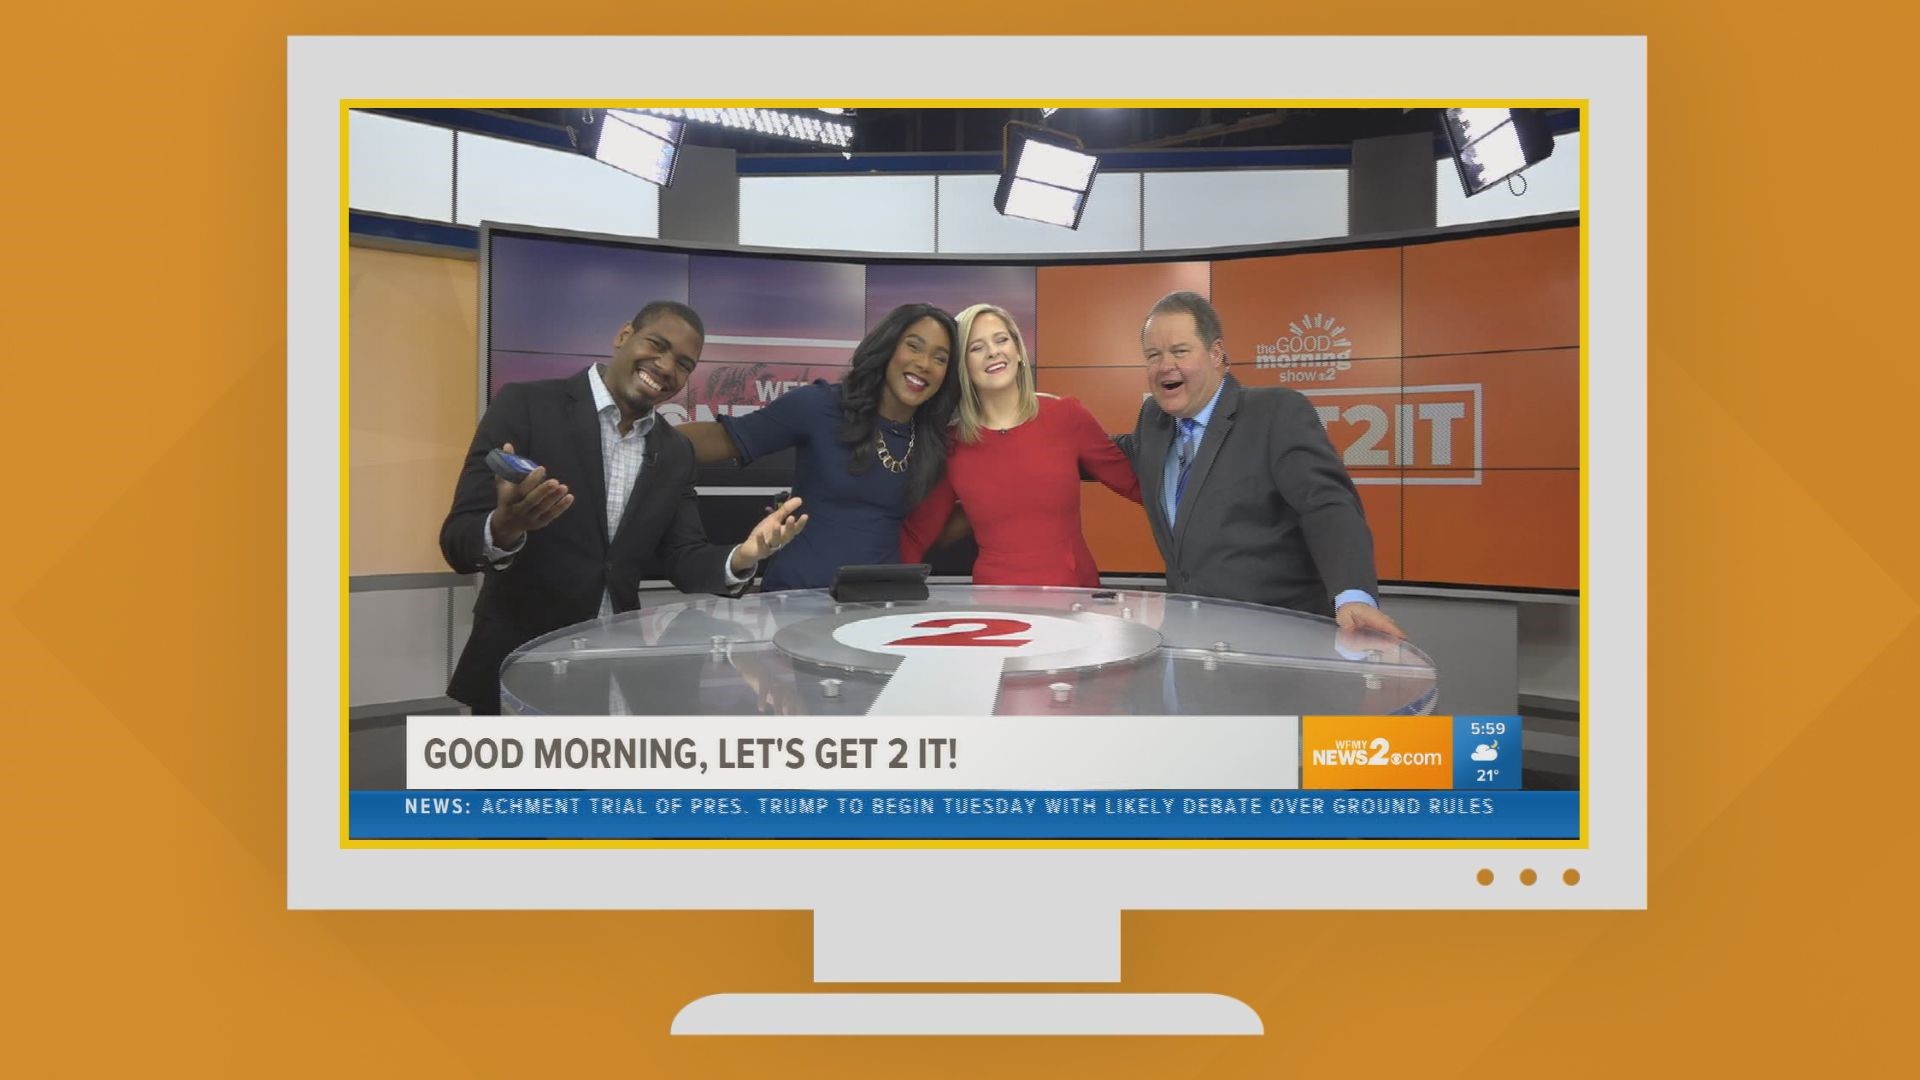 Another week has come and gone. Let's take a look back at all the fun we've had. This is the best of the Good Morning Show!